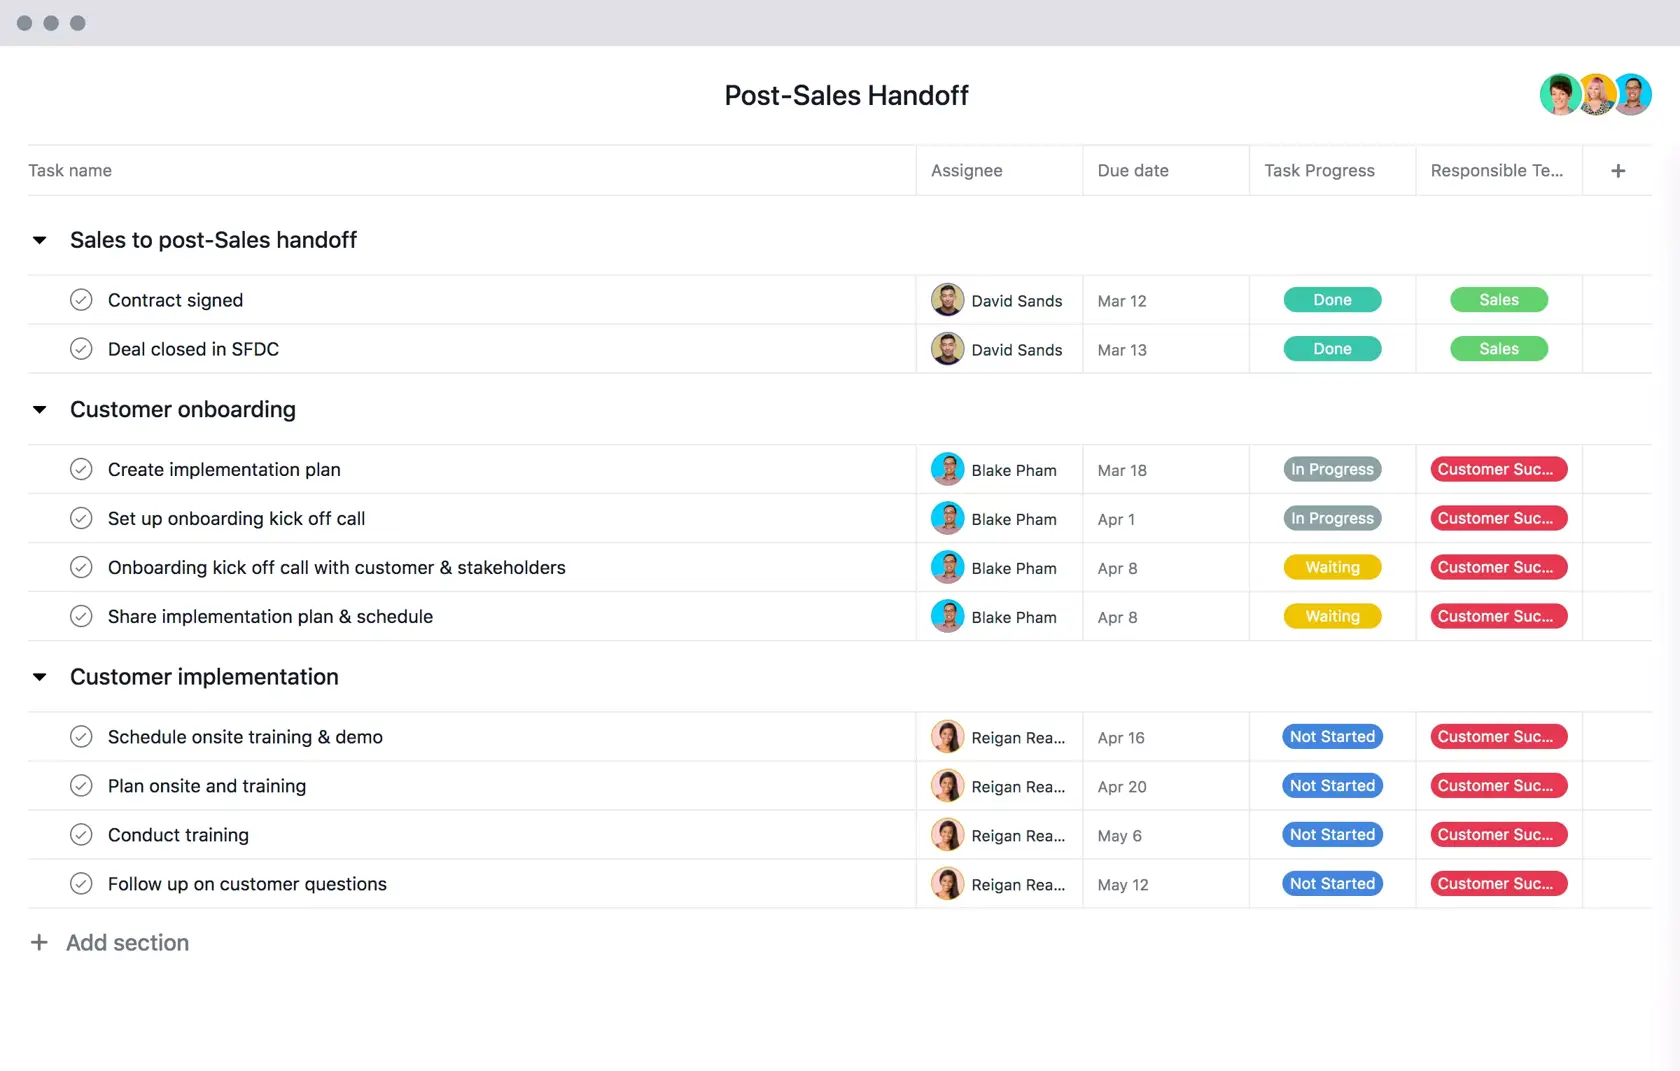 [Old product ui] Post-sales handoff template in Asana, spreadsheet-style project view (List)